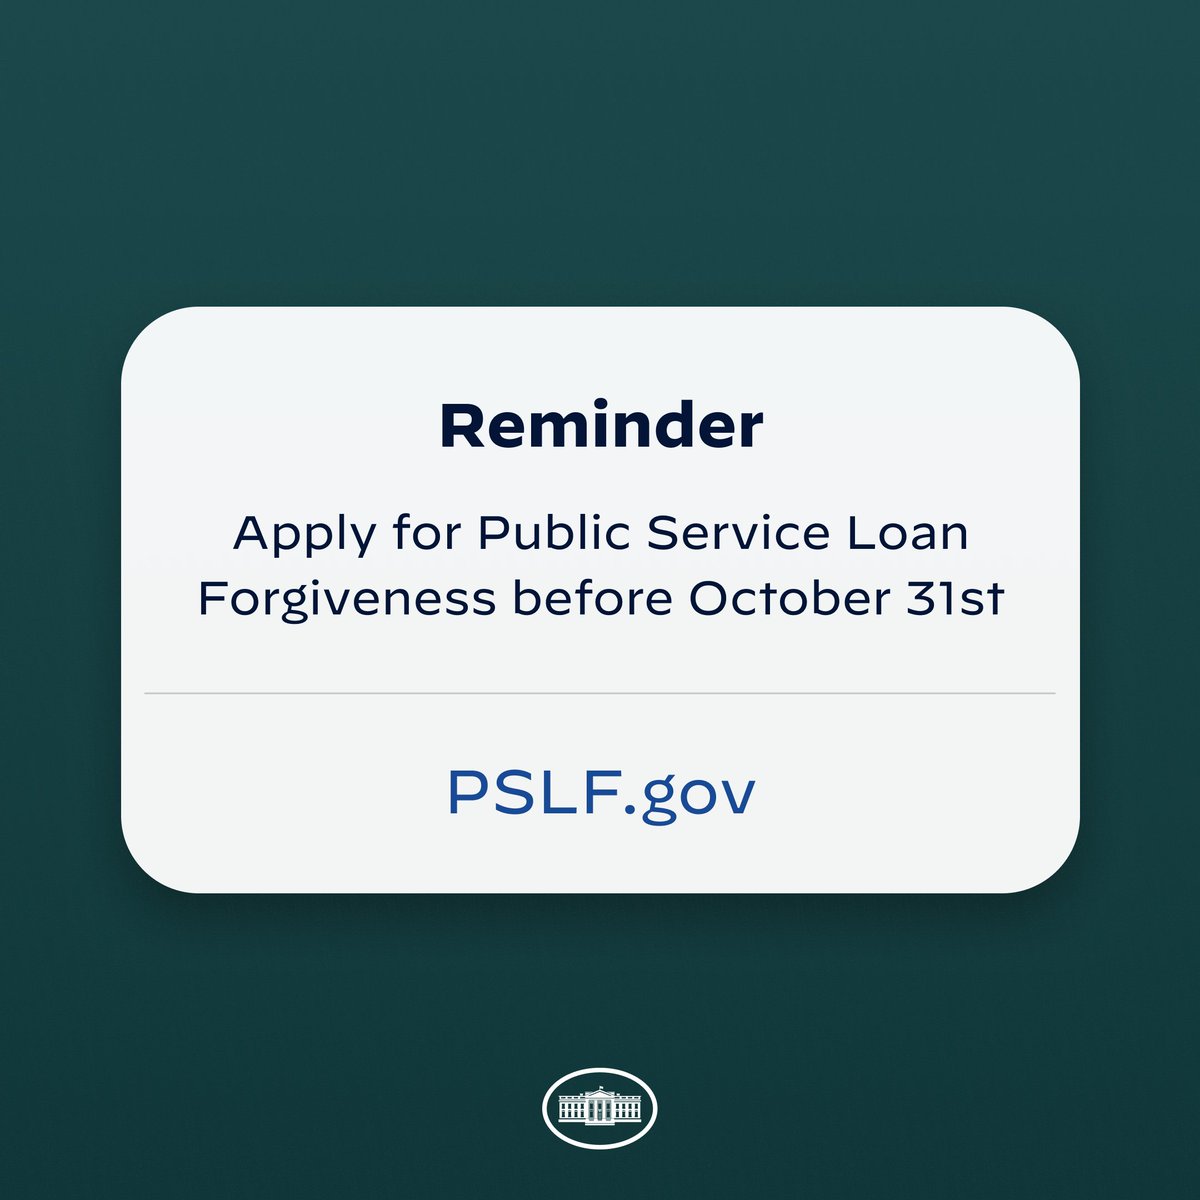 It’s easier than ever for borrowers working in public service to receive loan forgiveness under temporary changes made by this Administration to the Public Service Loan Forgiveness Program. Apply by October 31. Learn more at PSLF.gov.